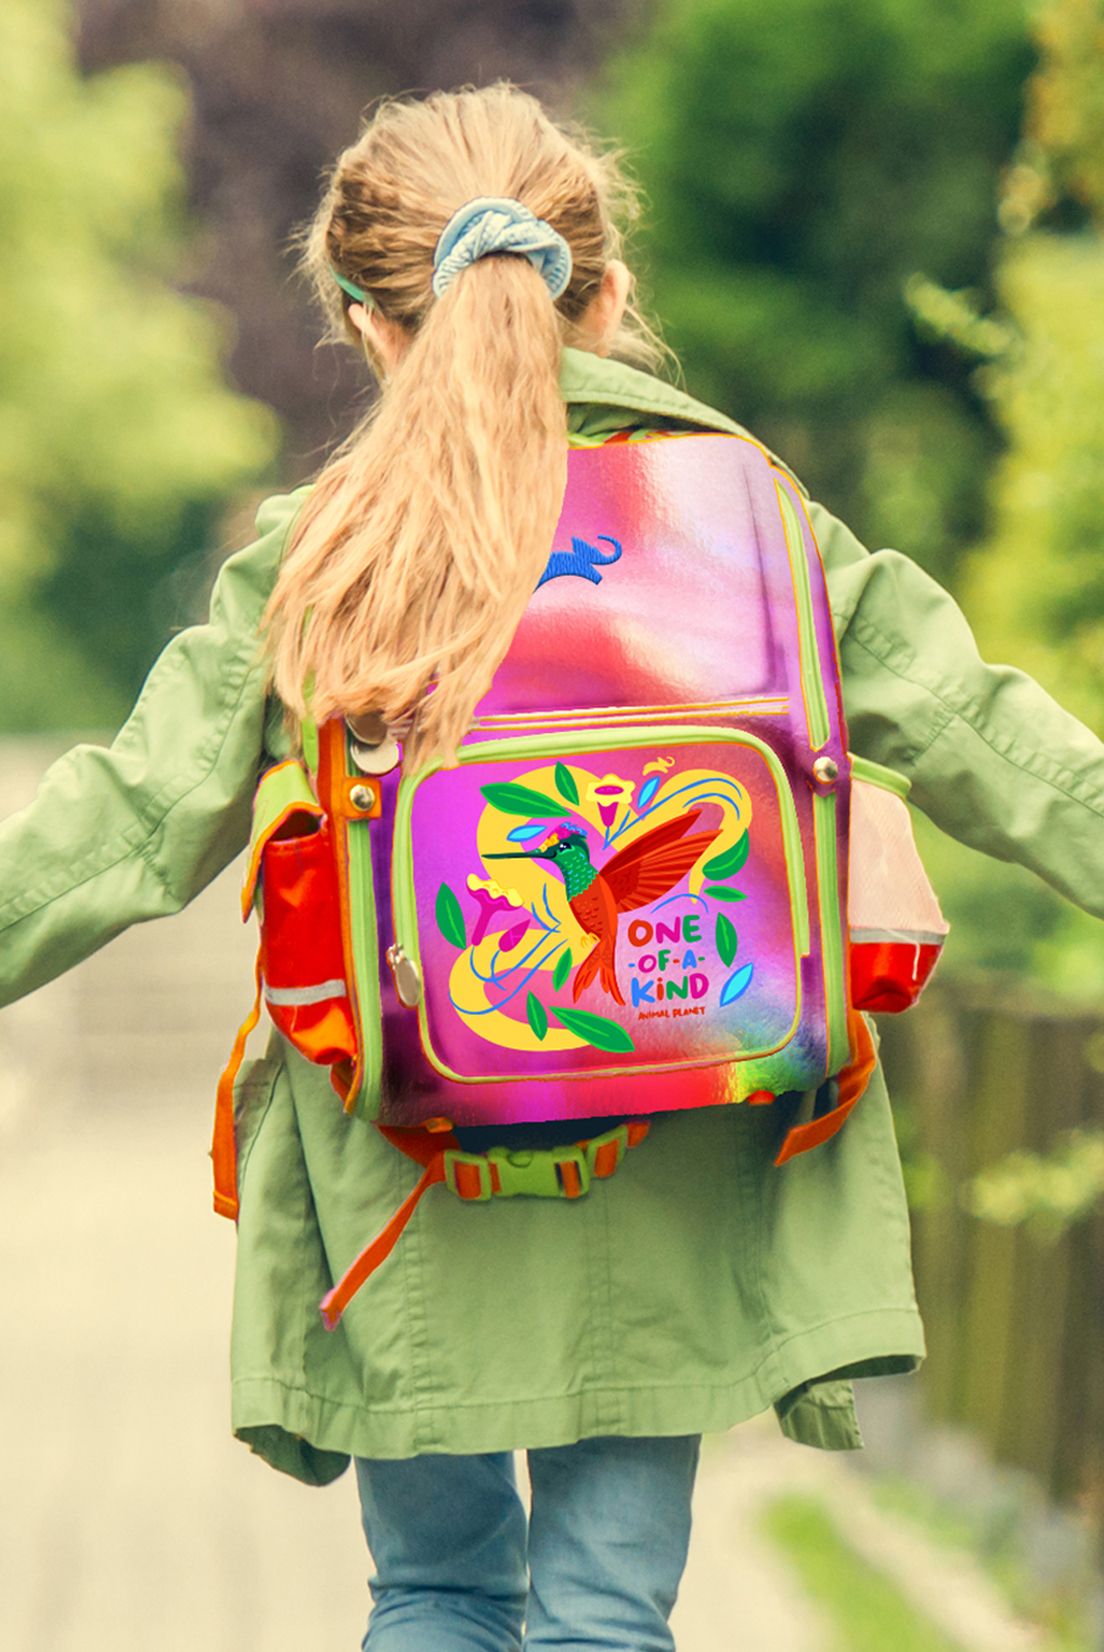 Girl wearing backpack featuring a colorful design with bird and the phrase "One-of-a-Kind."